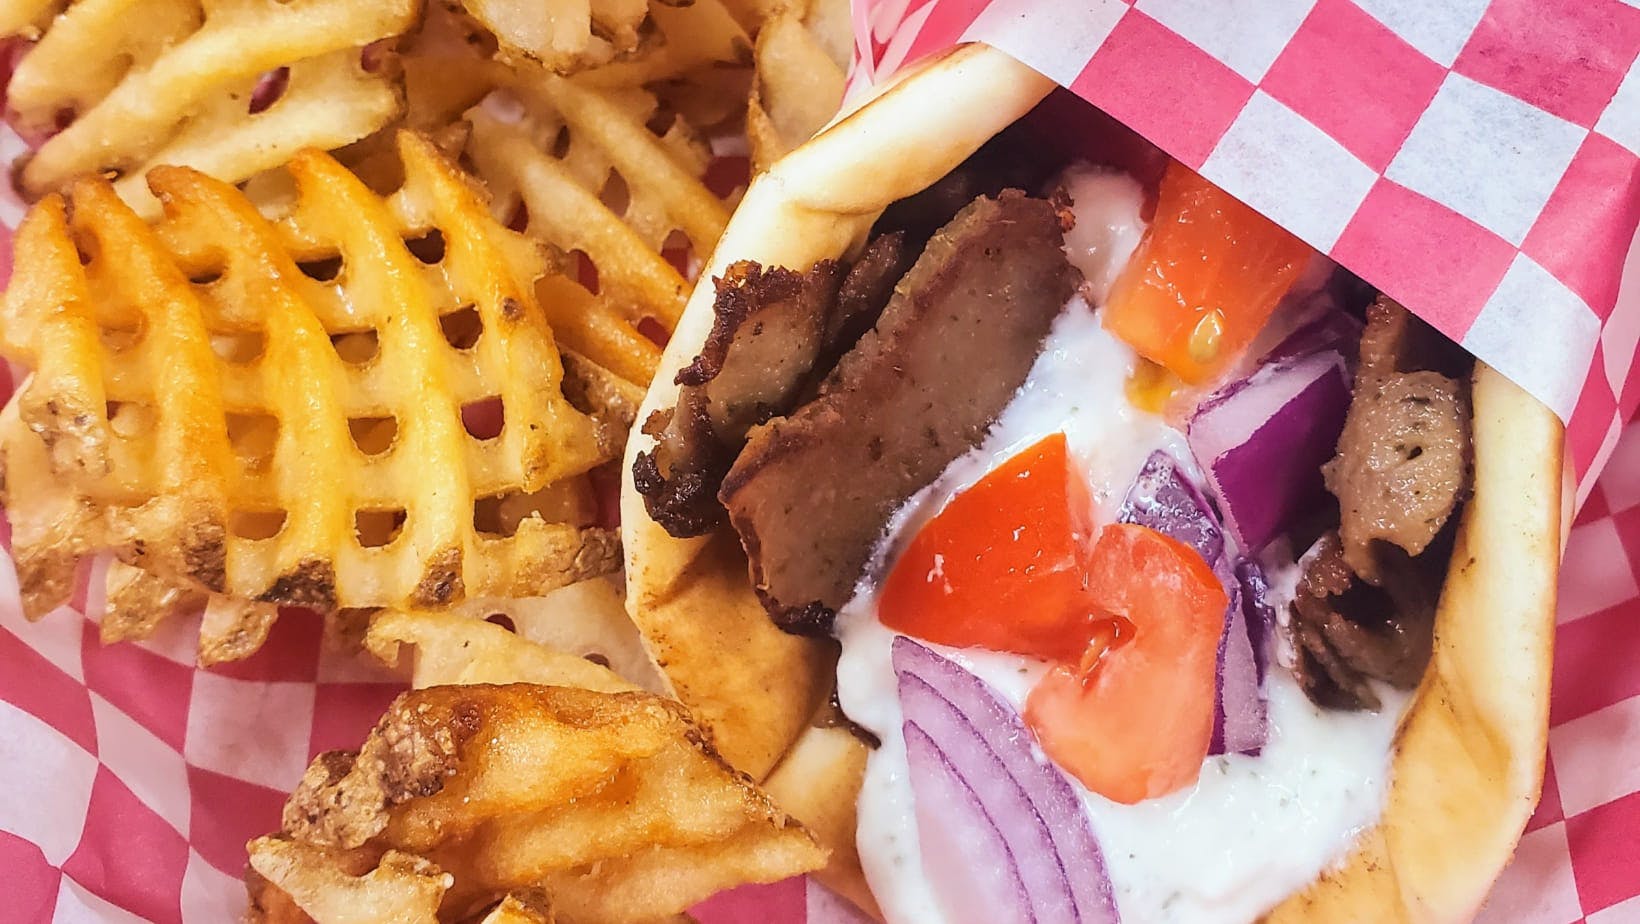 Just Gyros by GR's in Janesville - Highlight